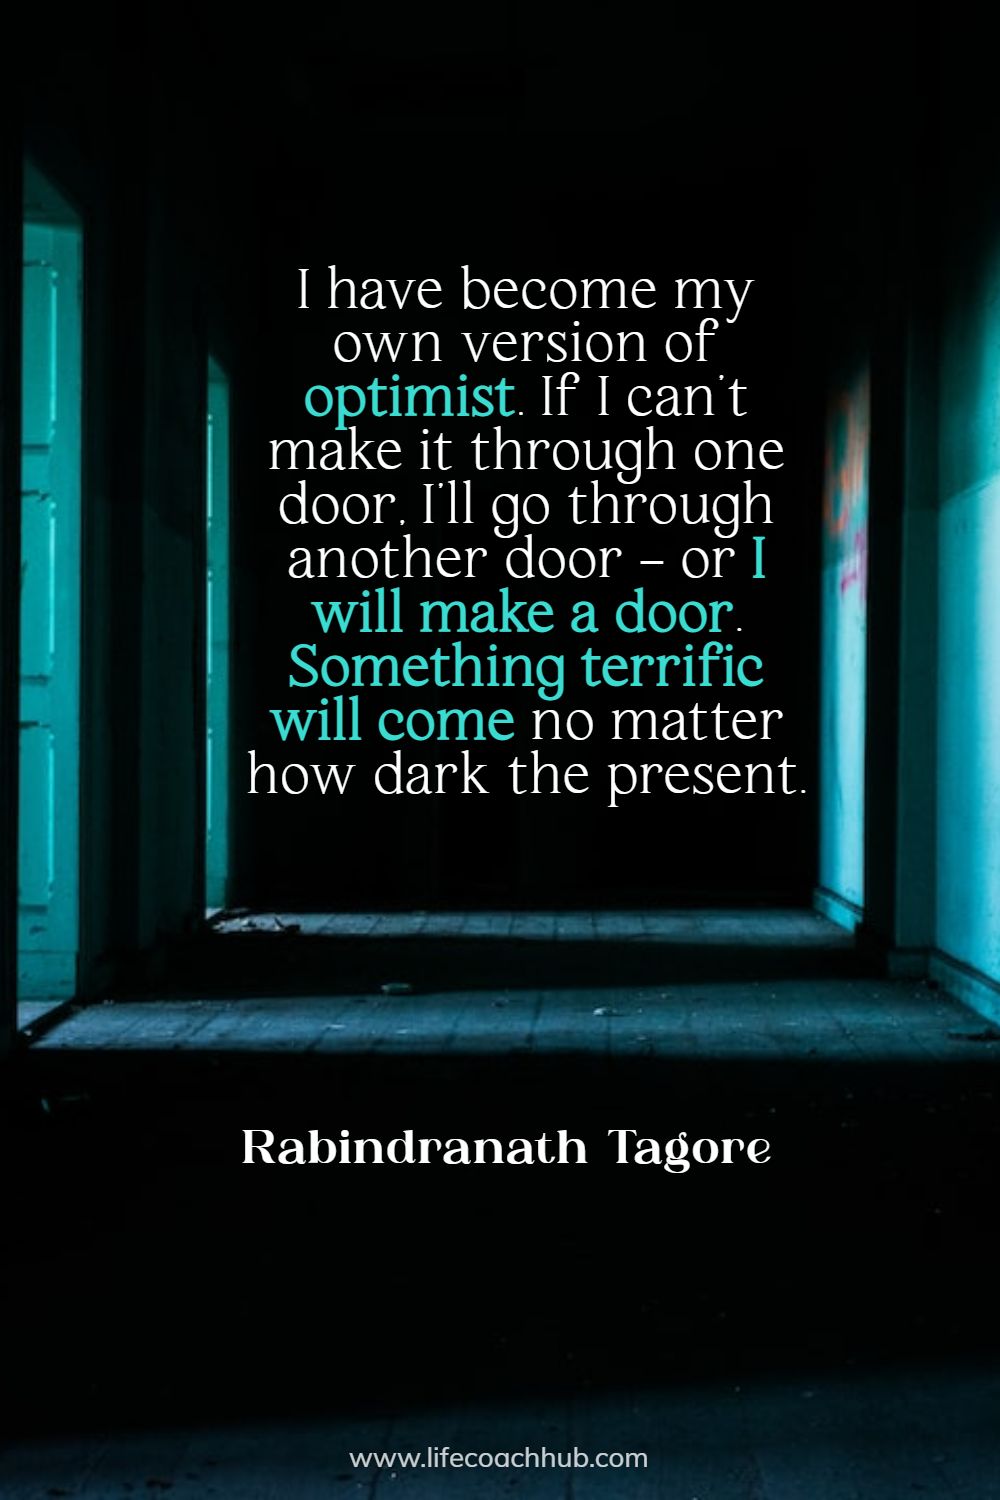 I have become my own version of optimist. If I can't make it through one door, I'll go through another door - or I'll make a door. Something terrific will come no matter how dark the present. Rabindranath Tagore Coaching Quote 